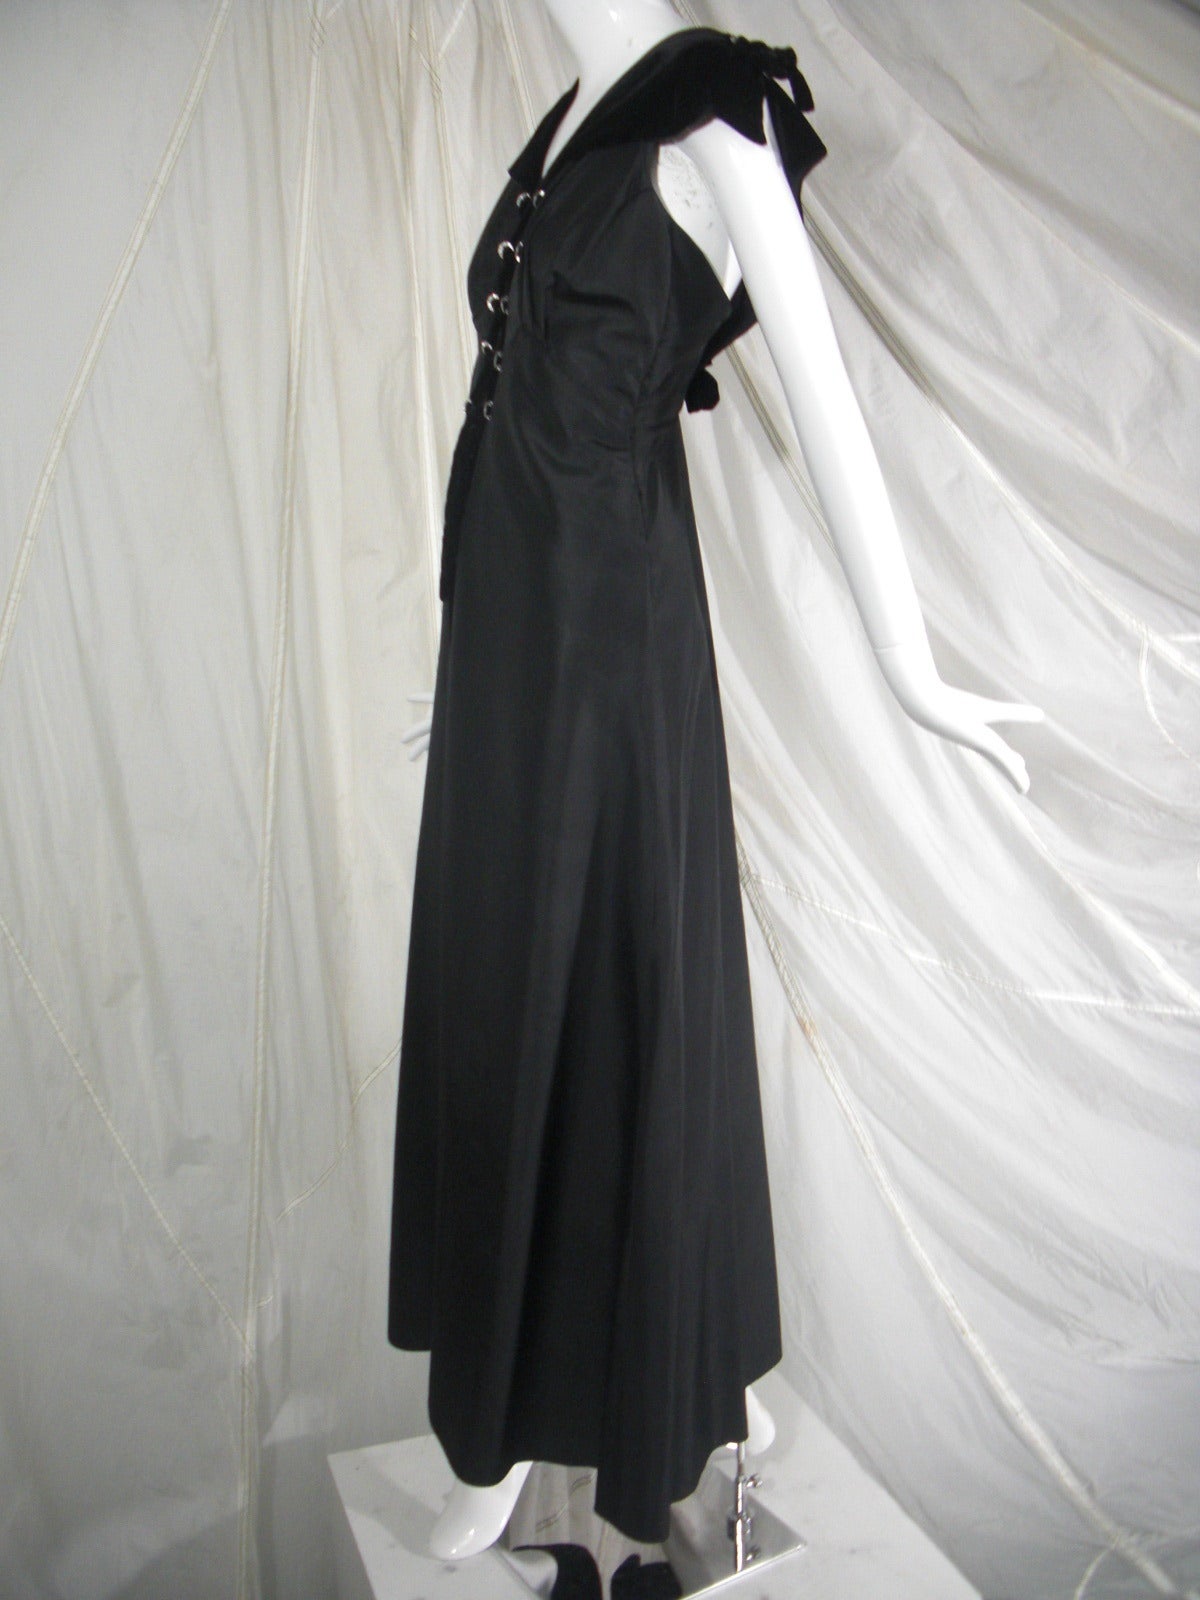 1930s Black Acetate and Velvet Lace Up Gown with Grommets

Period Style with Unusual Detail Back 

Lace Up Detail on Shoulder and Front 

Rhinestone Grommets